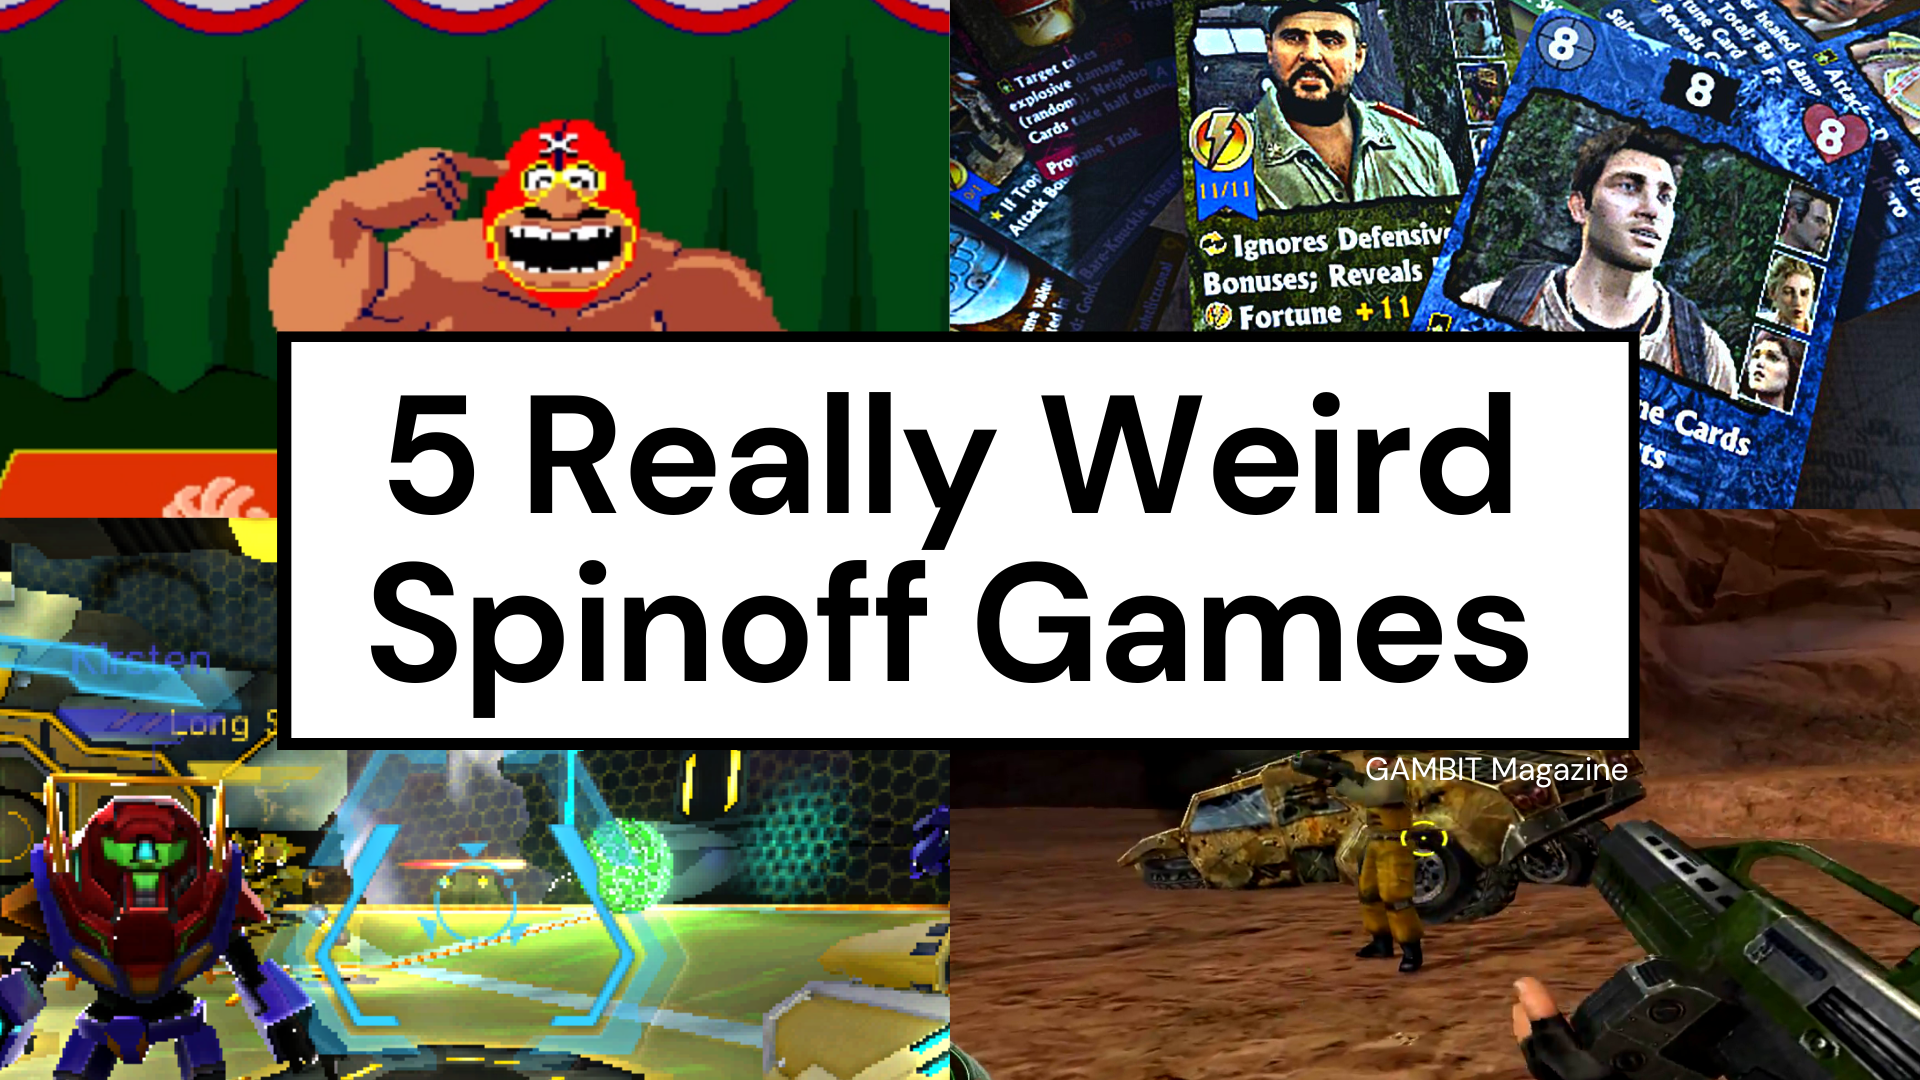 5 Really Weird Spinoff Games